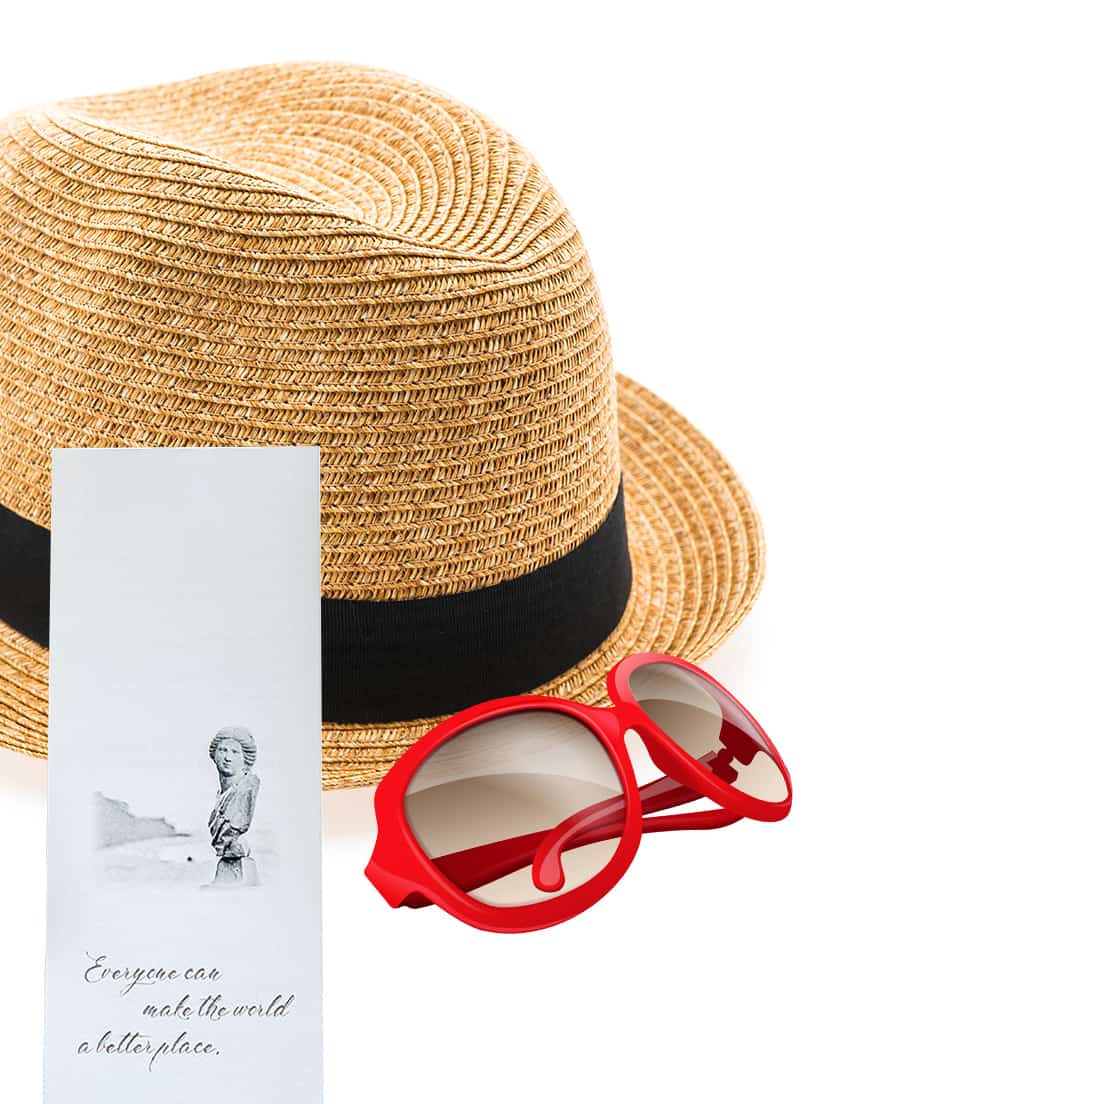 image of a summer hat with red rimmed sunglasses below